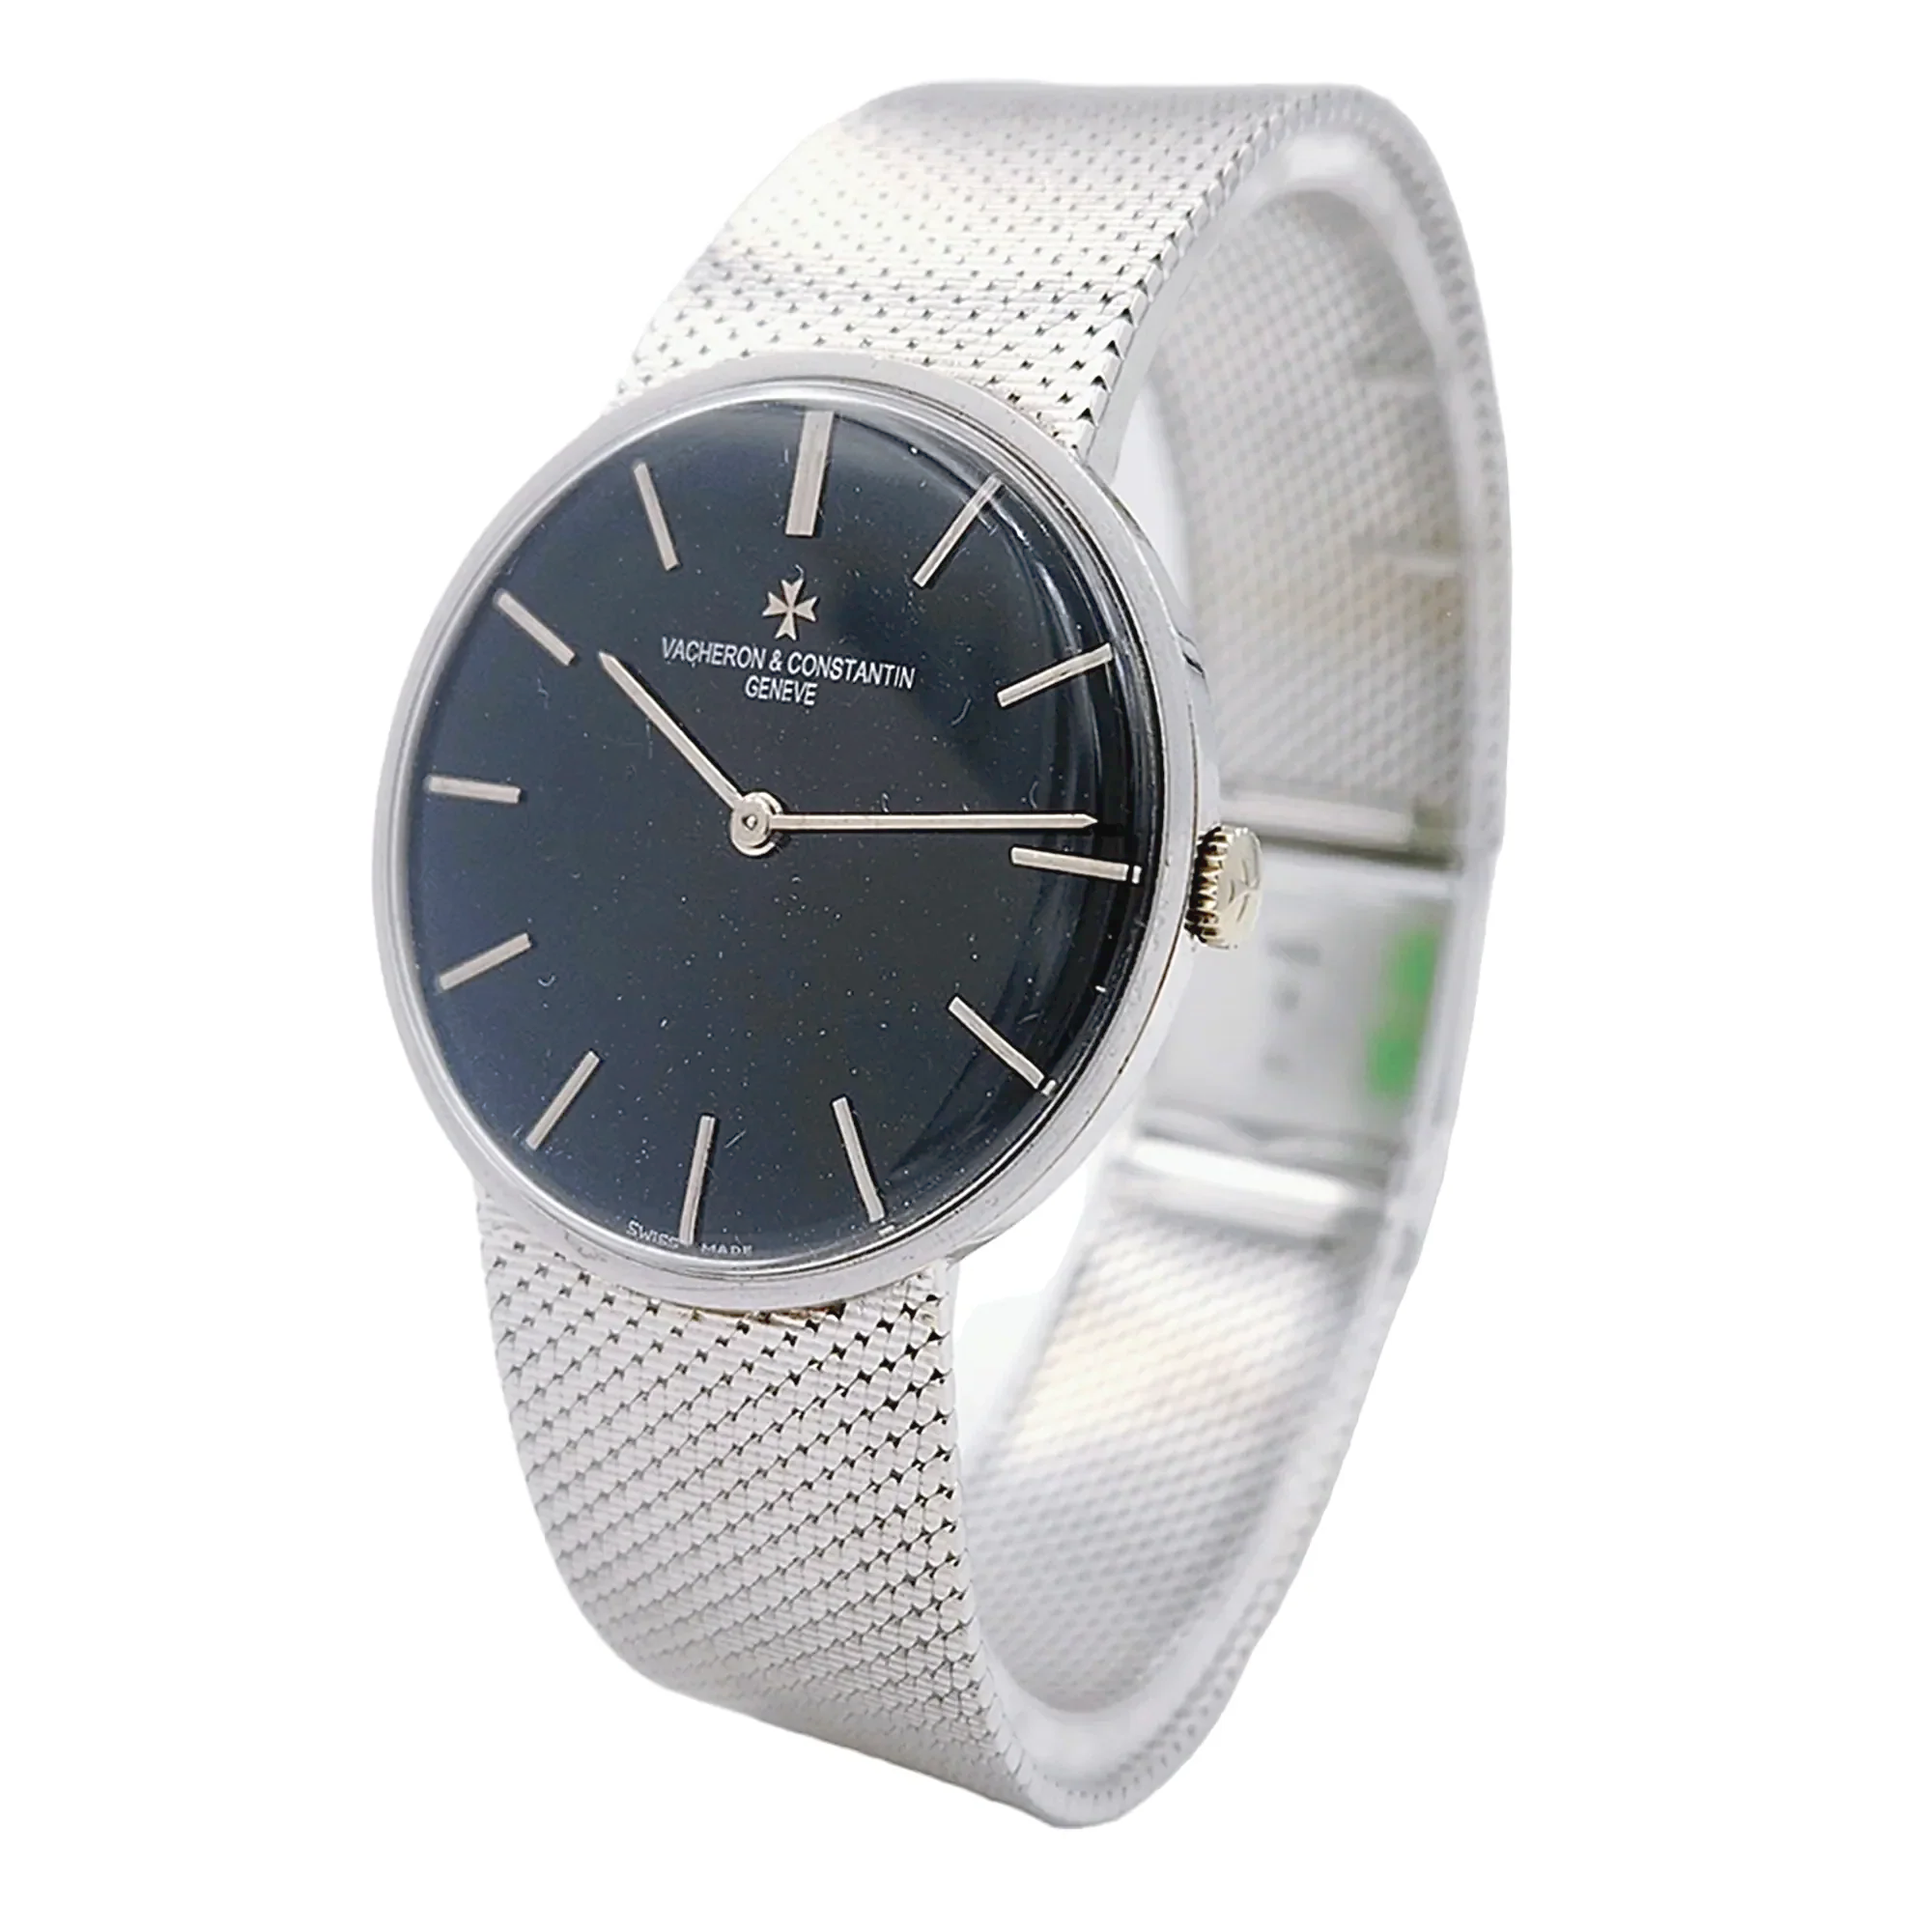 1970'S Men's Vacheron & Constantin 33mm Vintage Solid 18K White Gold Watch with Black Dial. (Pre-Owned)